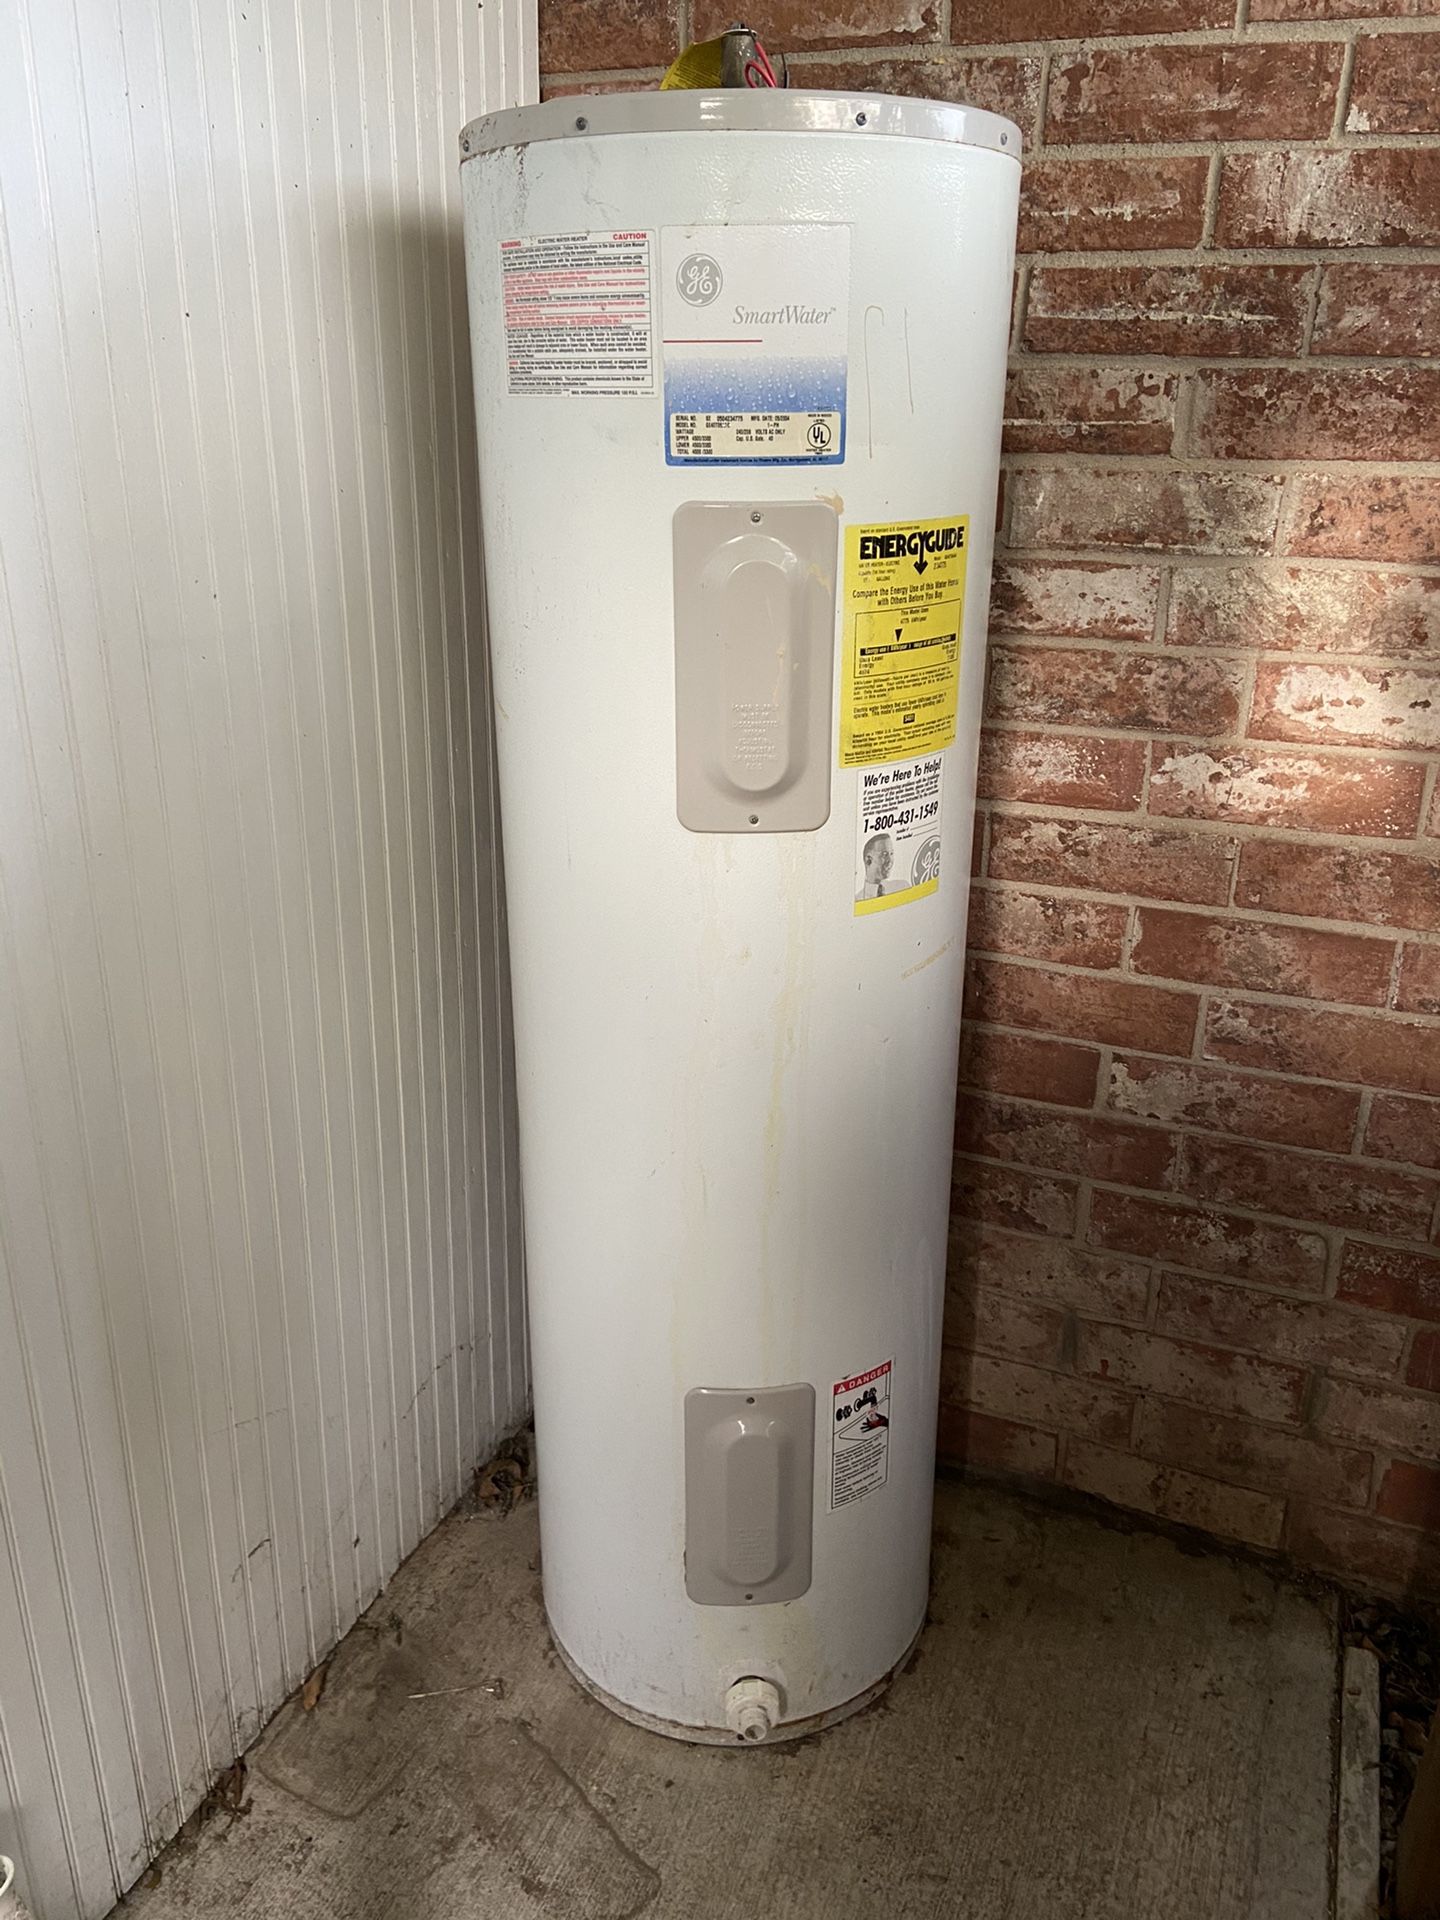 Water heater OBO - for parts - can make a diy bbq pit